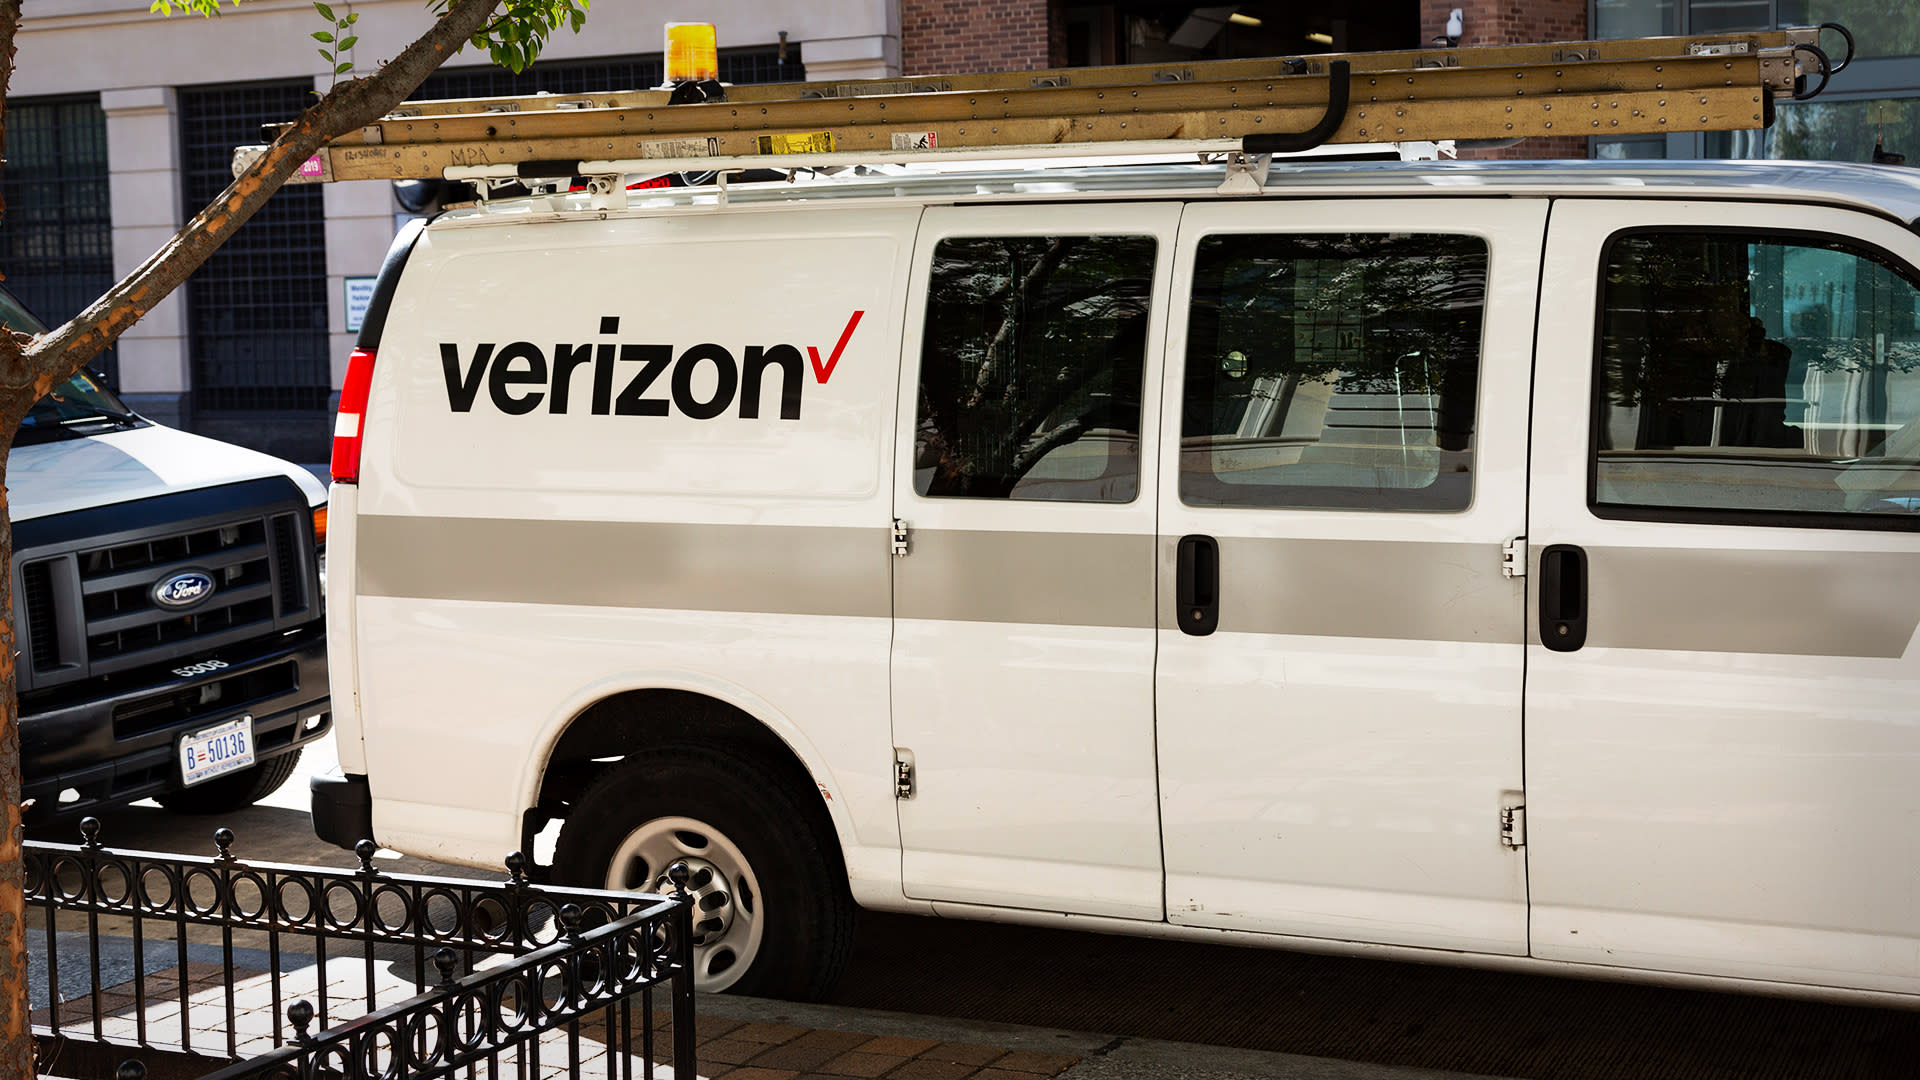 How to Buy Verizon and Its 7.5% Dividend Yield With Low Risk